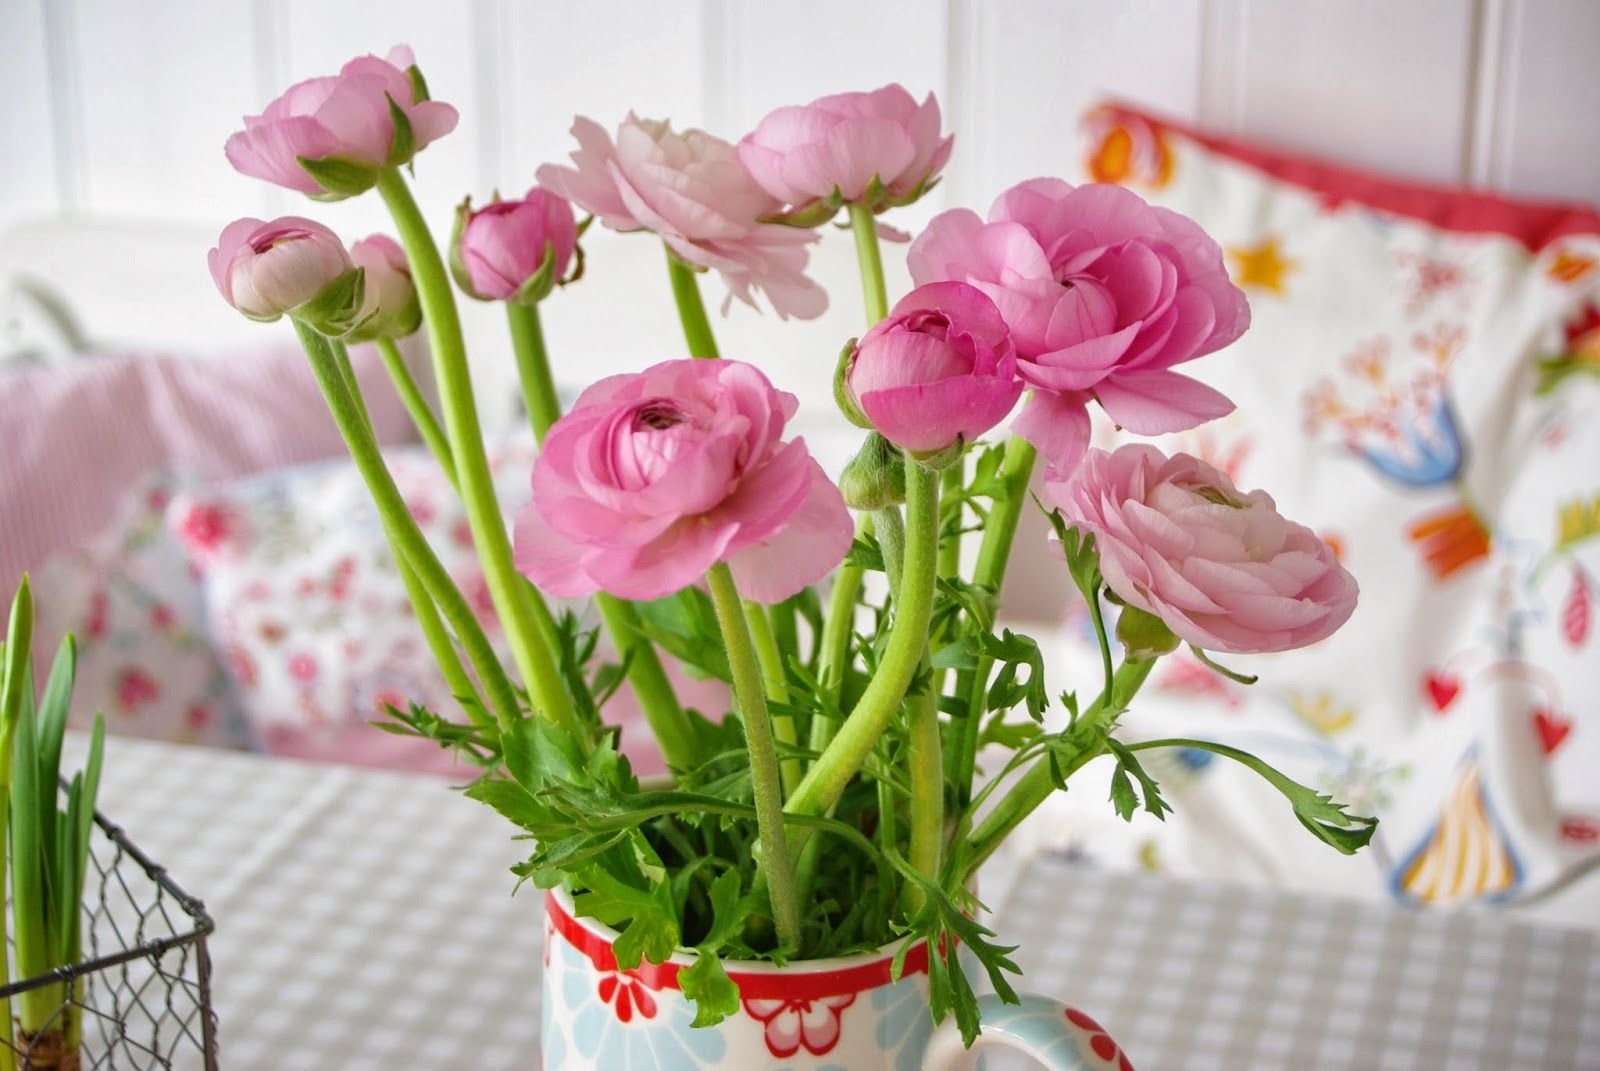 The colorful beauty of ranunculus